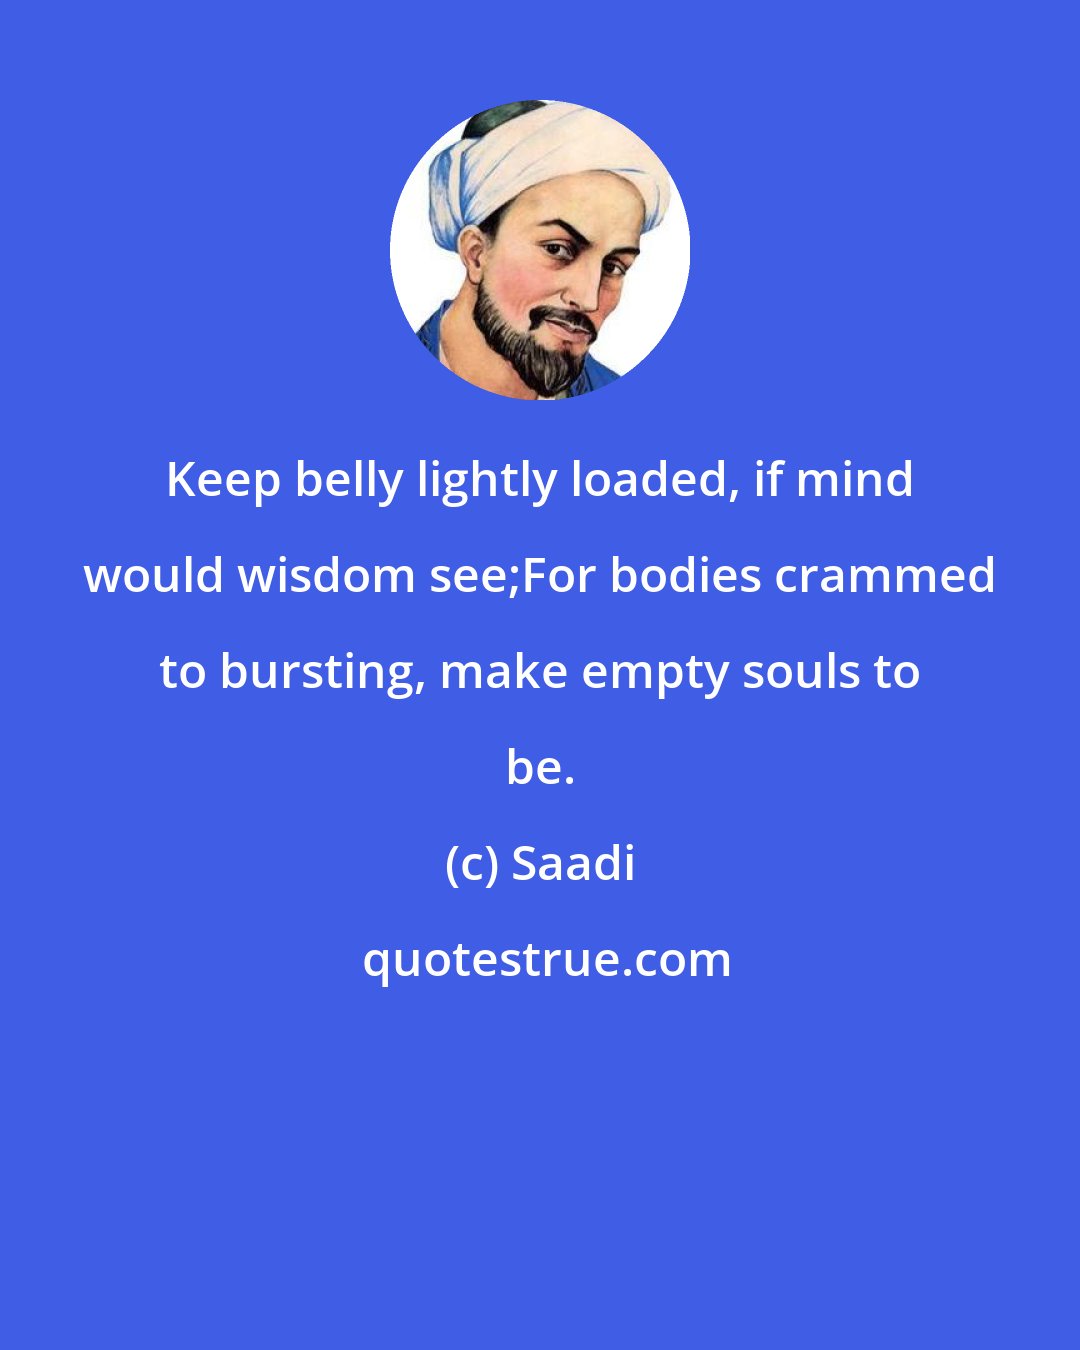 Saadi: Keep belly lightly loaded, if mind would wisdom see;For bodies crammed to bursting, make empty souls to be.